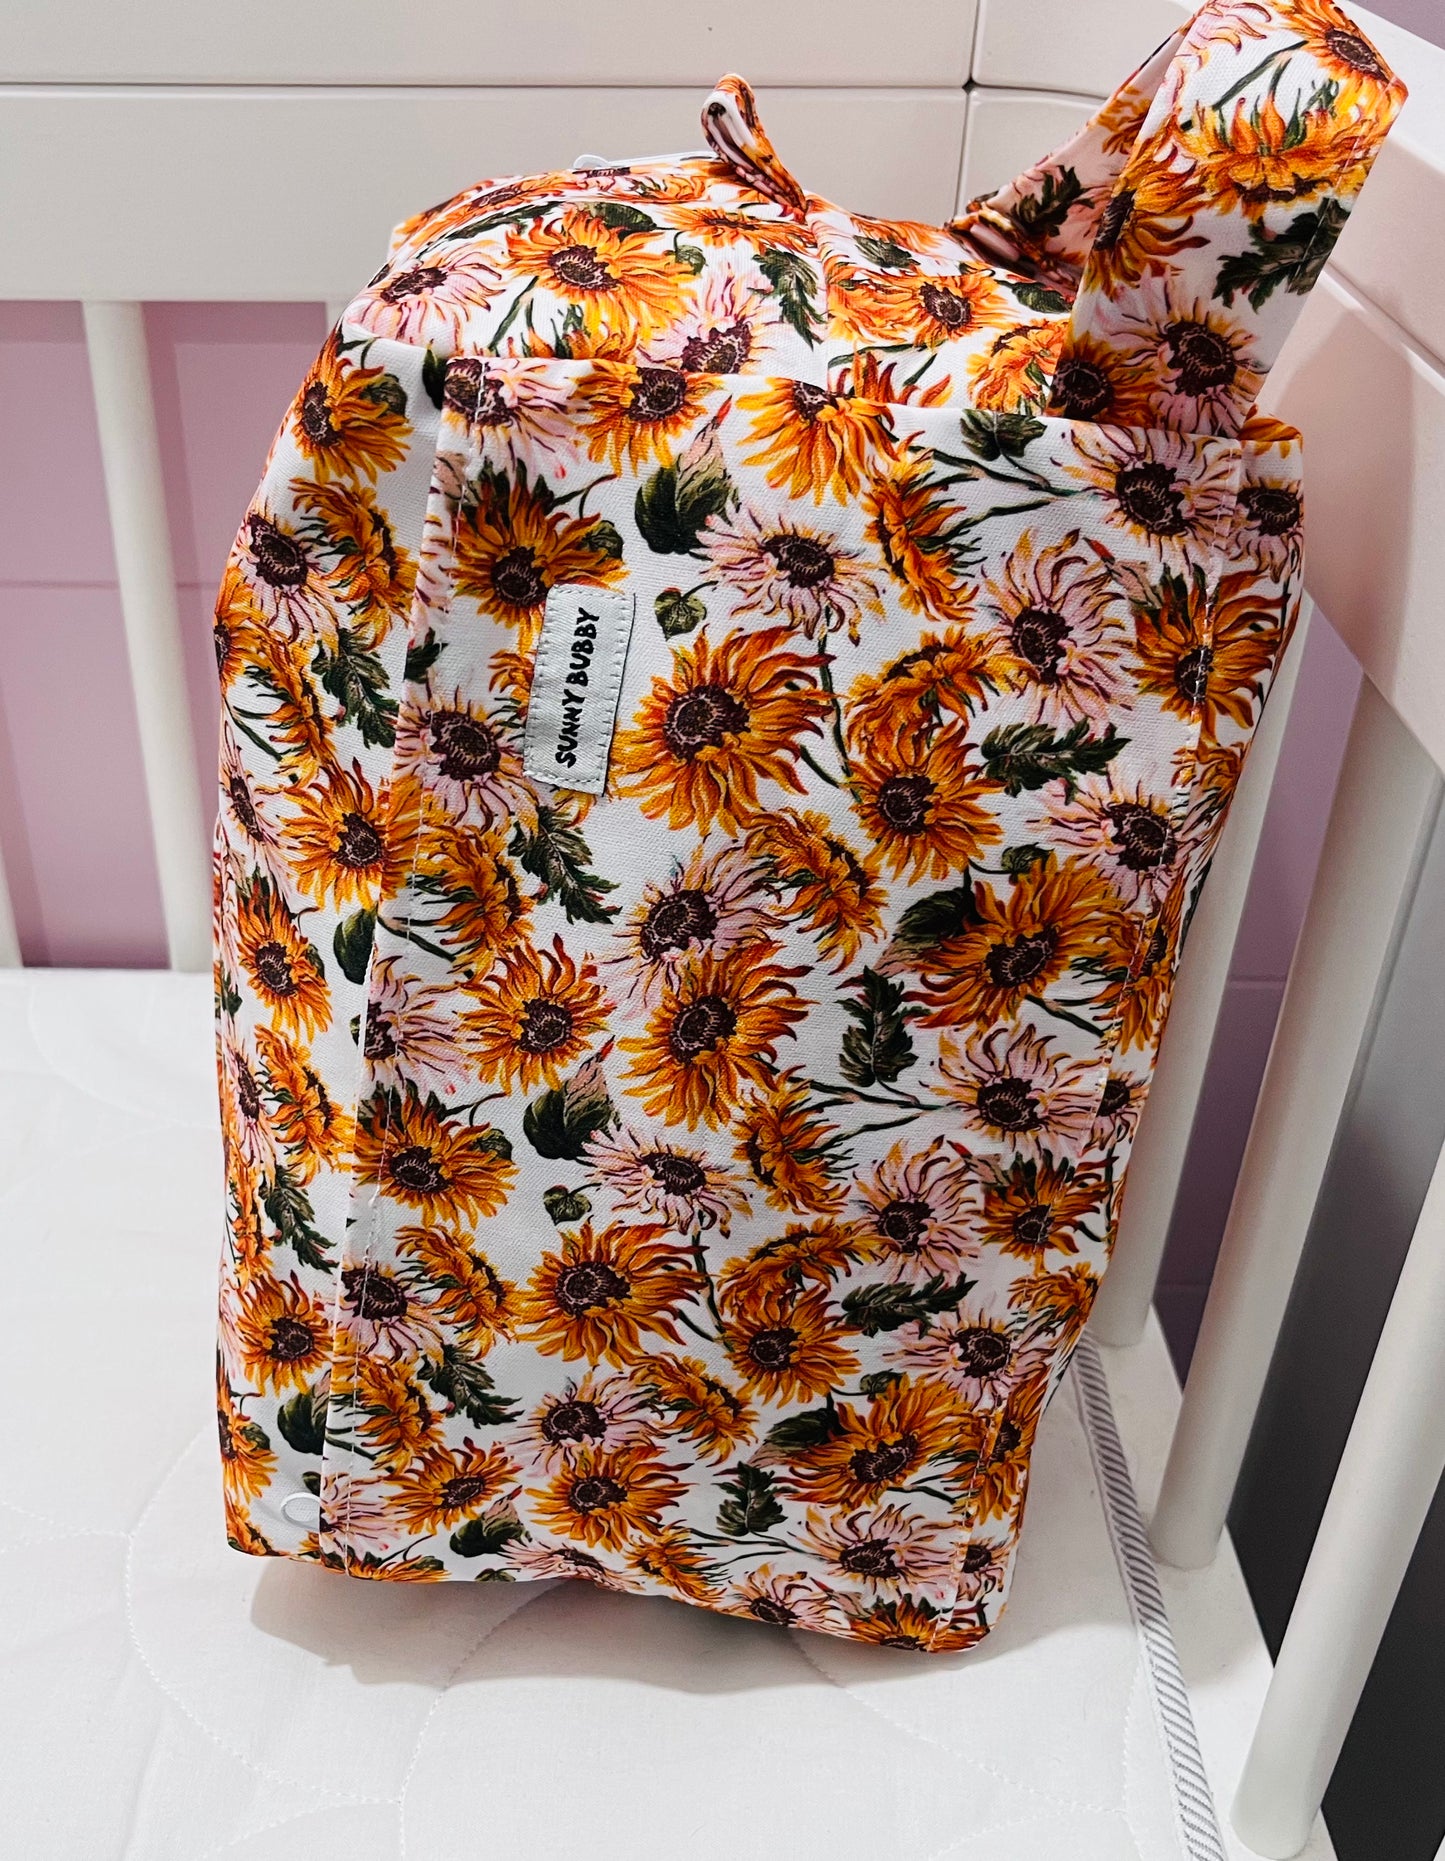 The Sunflowers Nappy Wet Bag POD